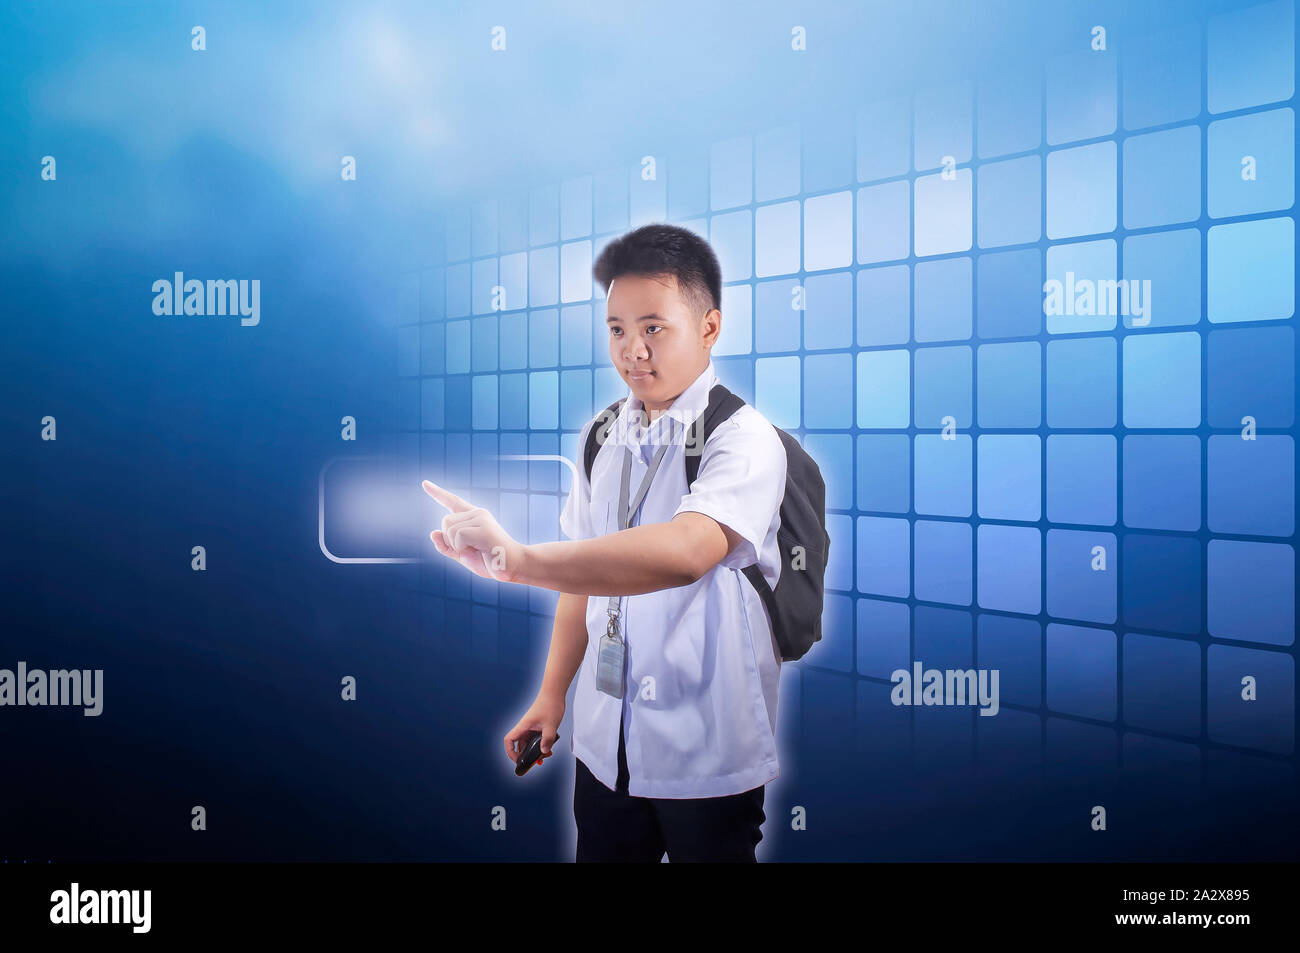 Teenage boy student in school uniform with backpack using holographic screen in advance technology concept Stock Photo